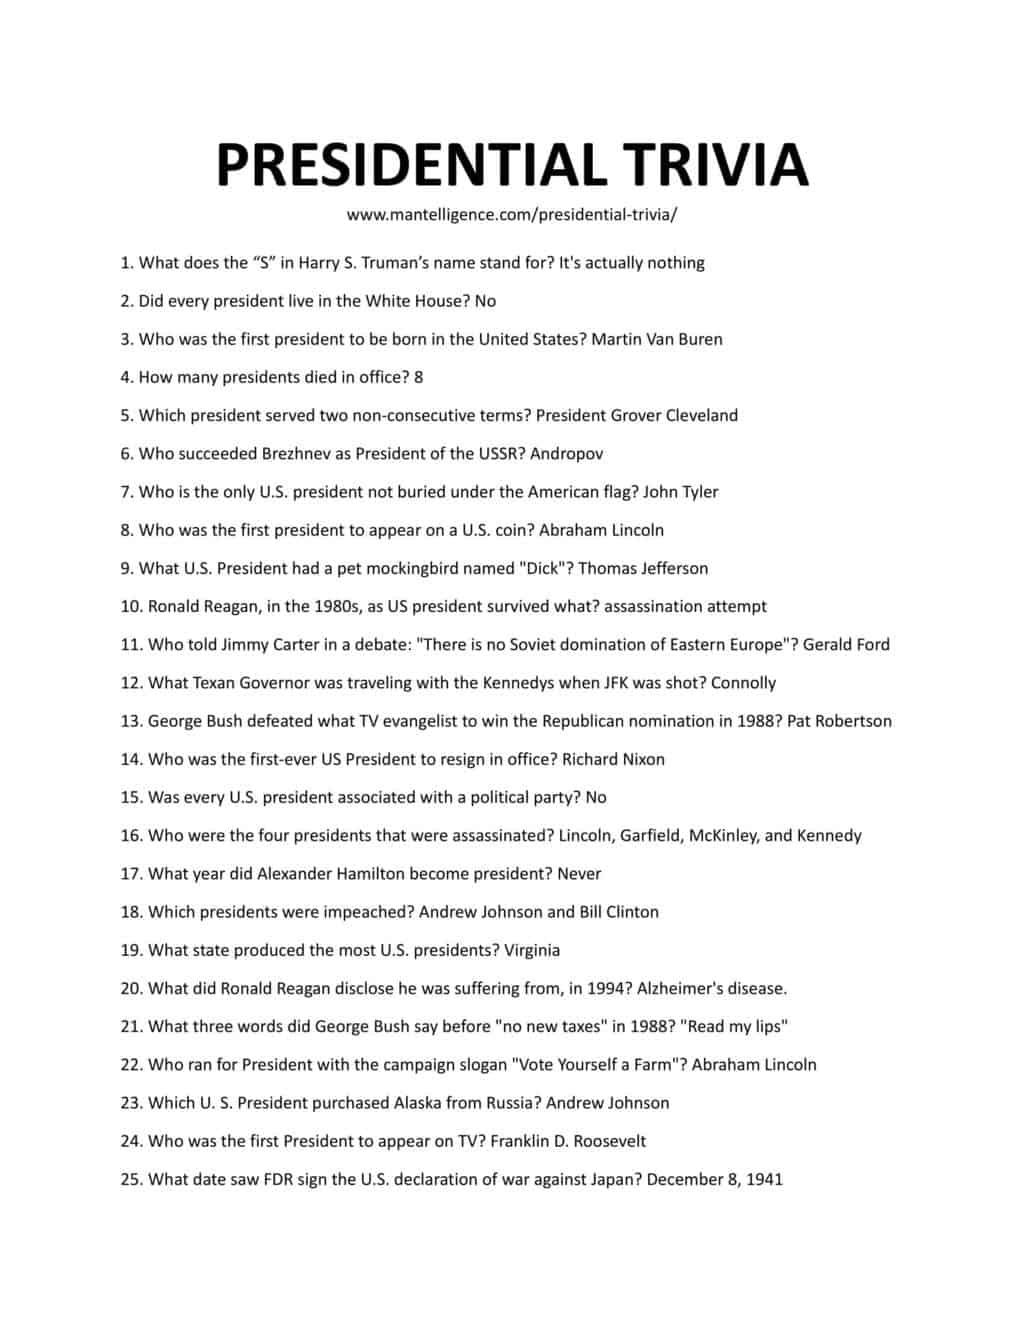 critical thinking questions on presidential foreign policies answer key